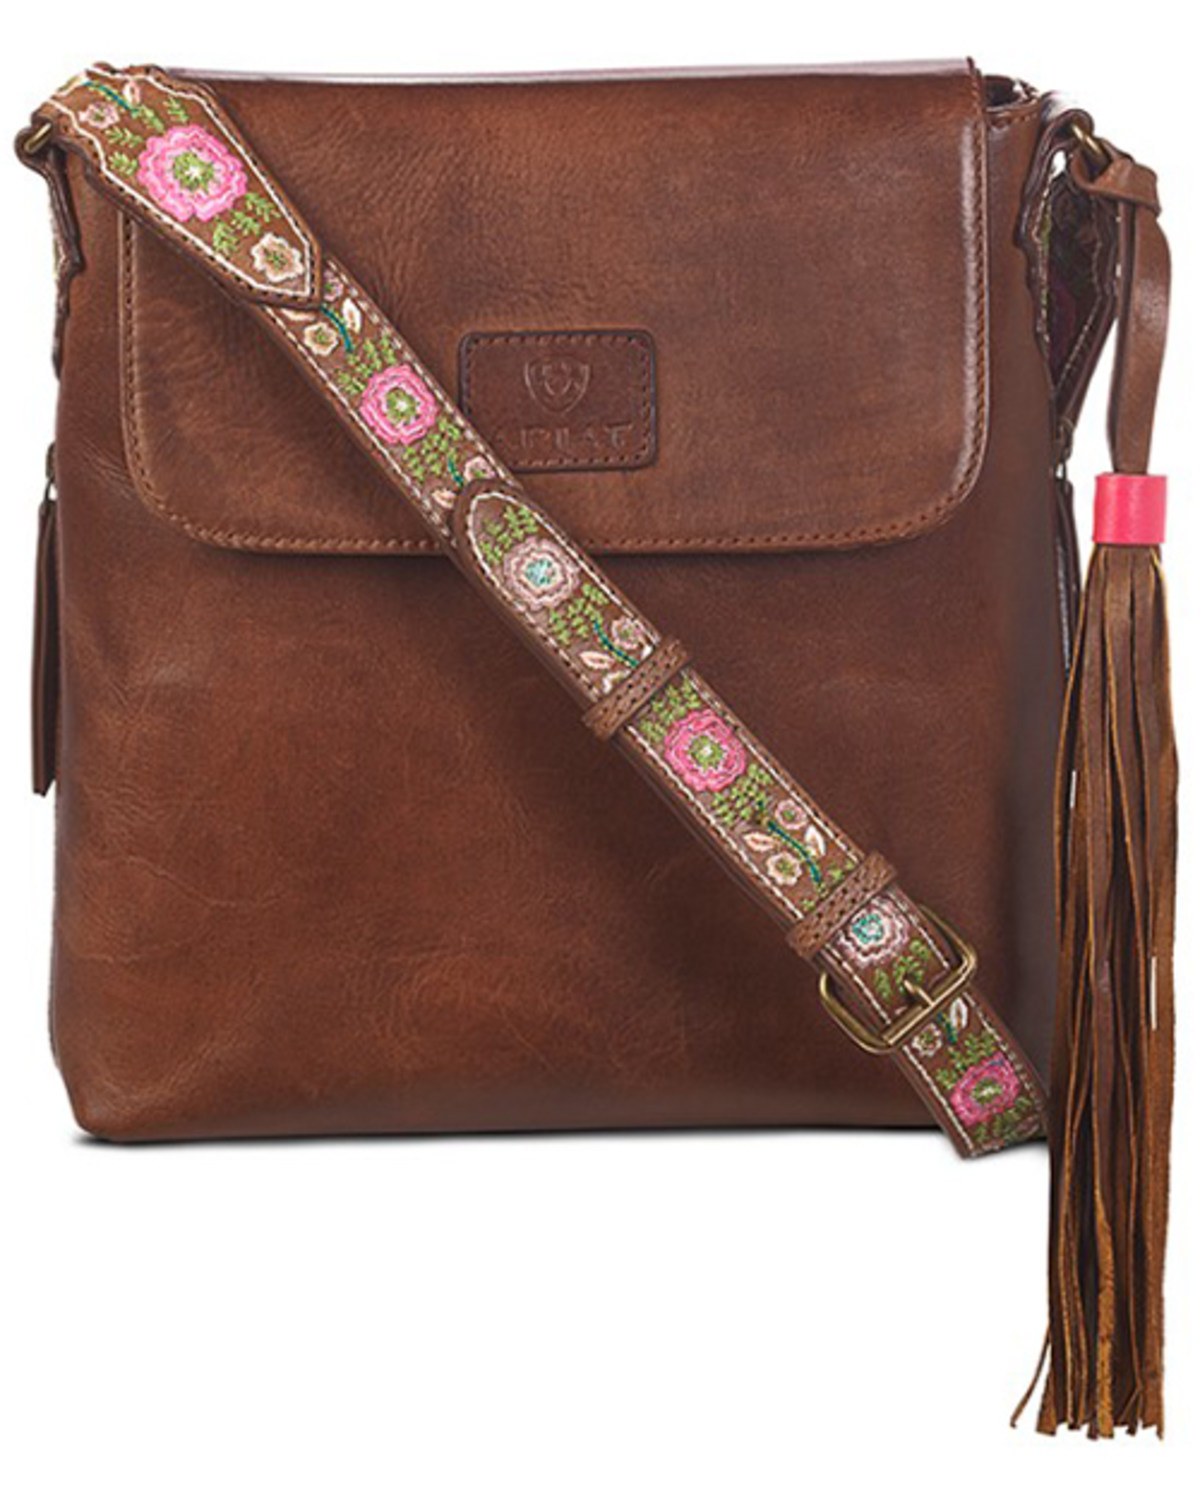 Ariat Women's Addison Concealed Carry Crossbody Bag